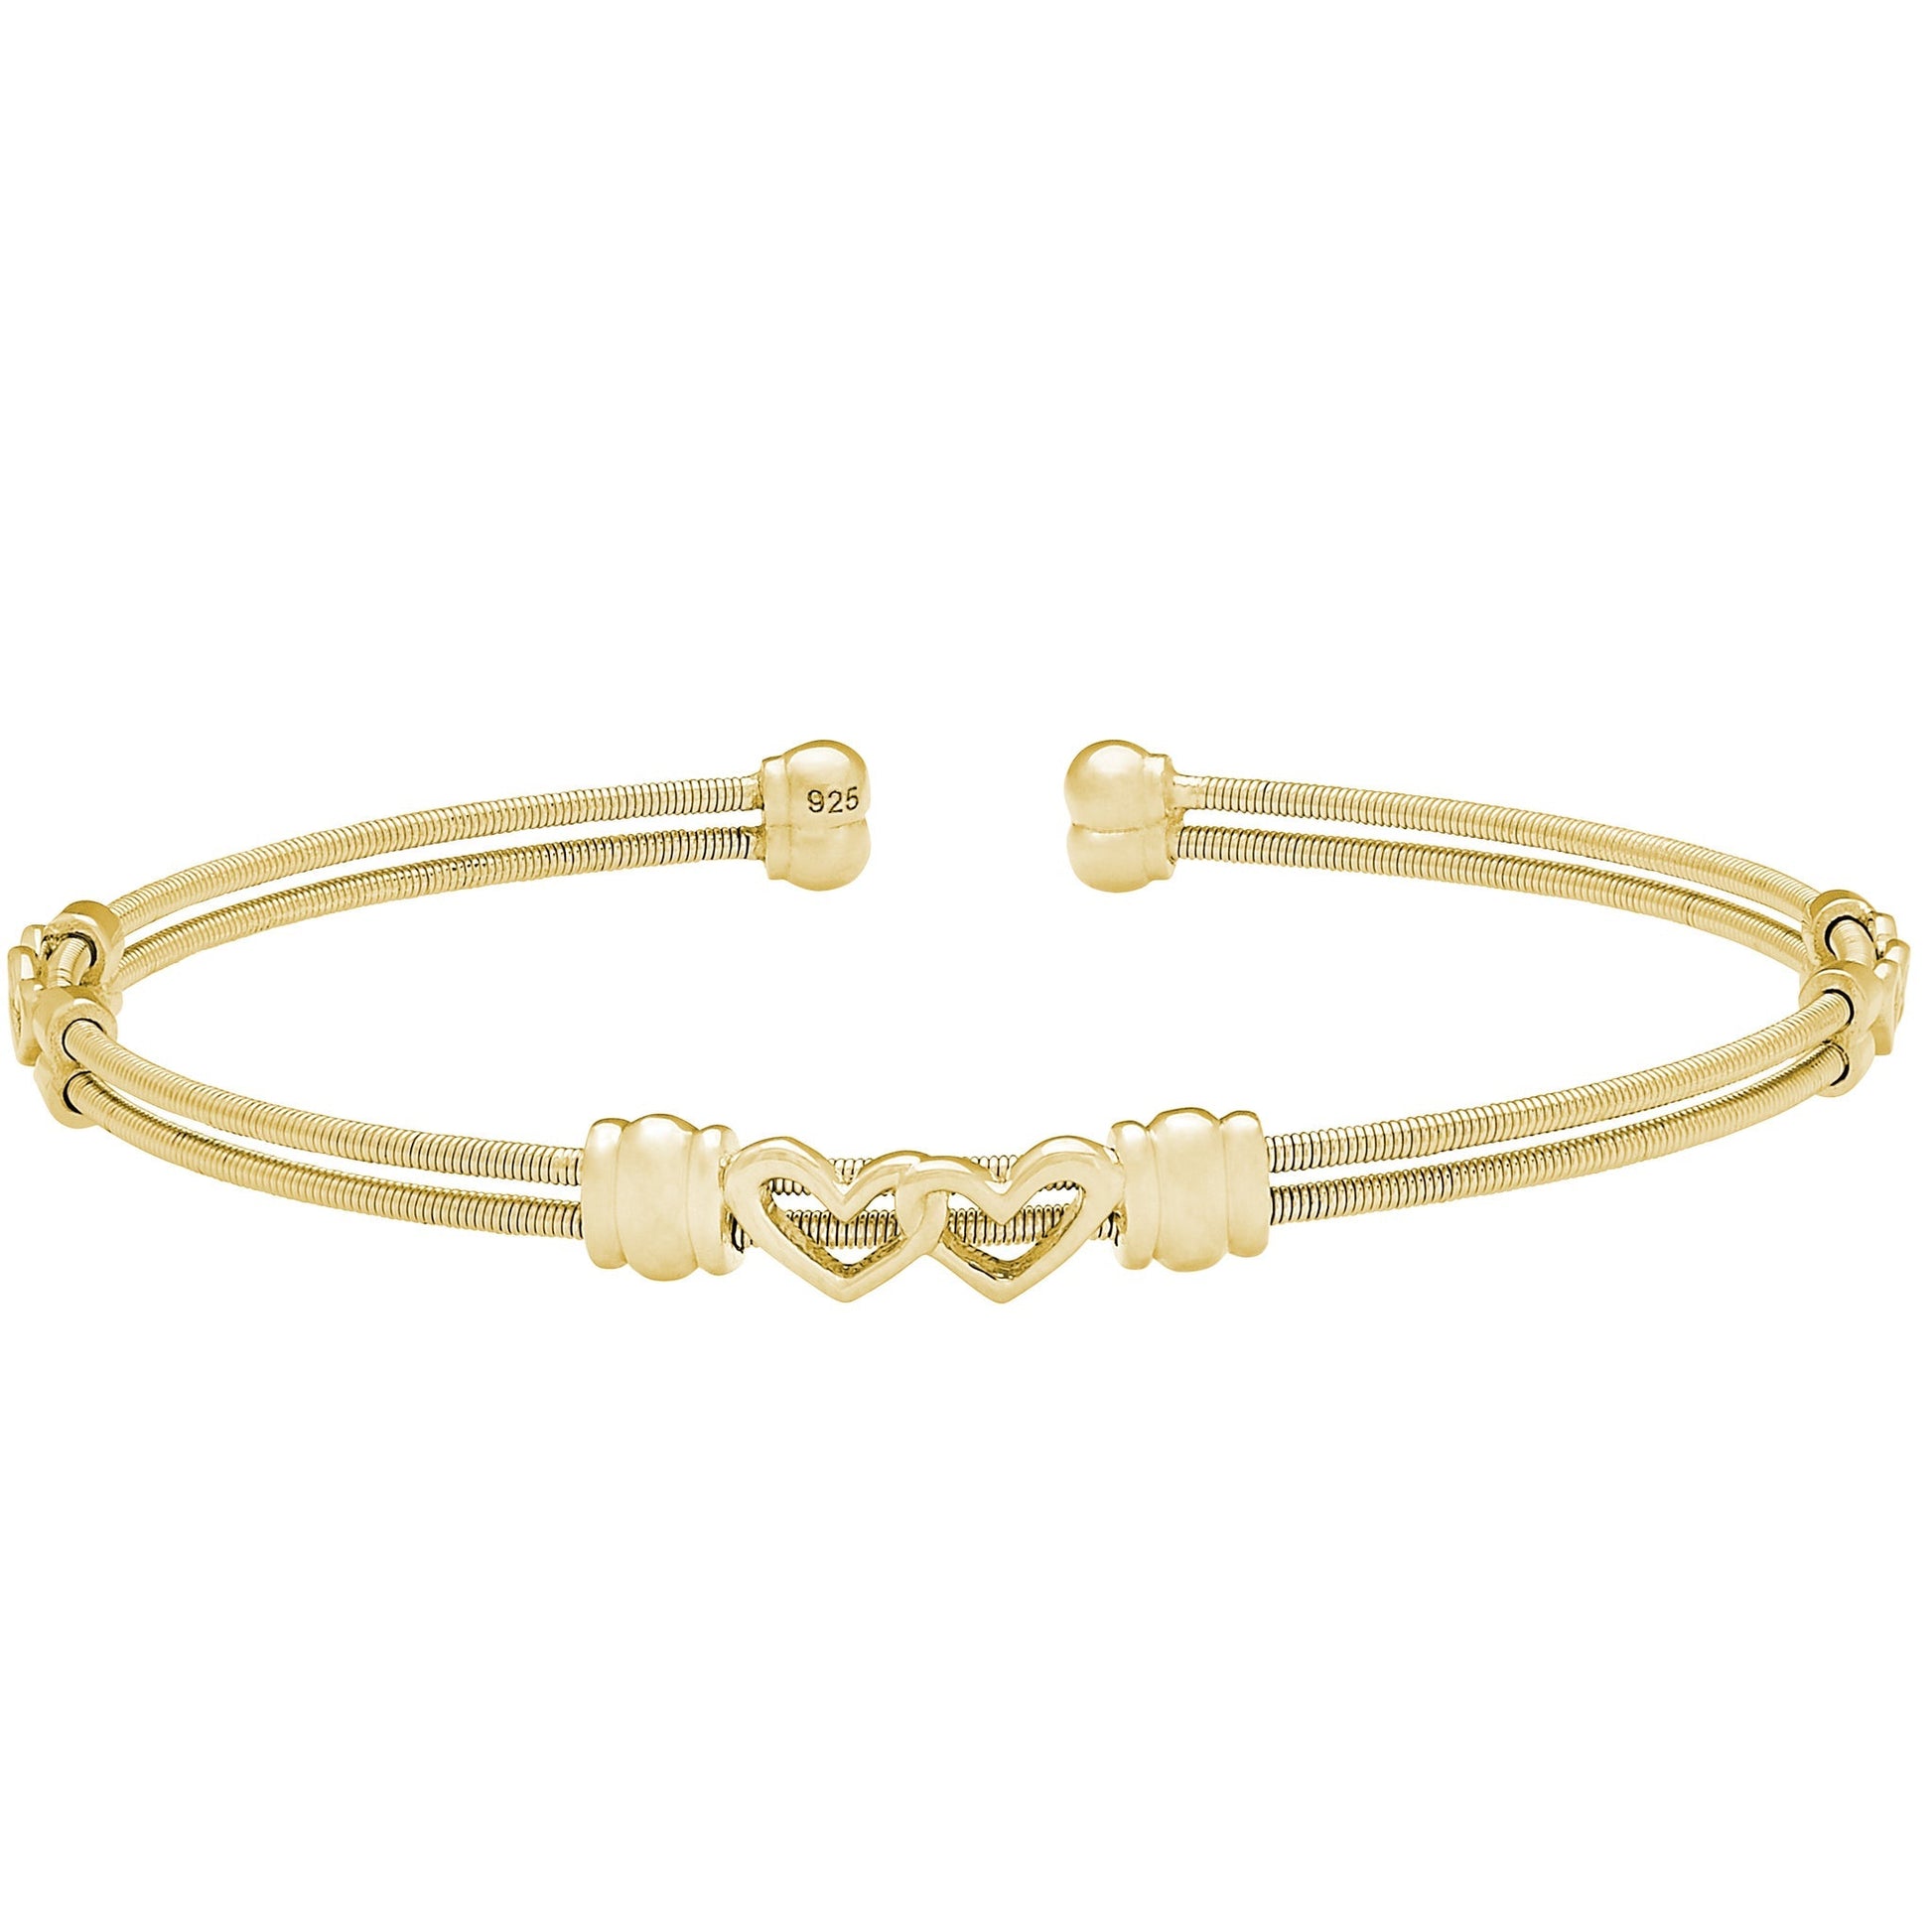 A two cable bracelet with two linked hearts displayed on a neutral white background.